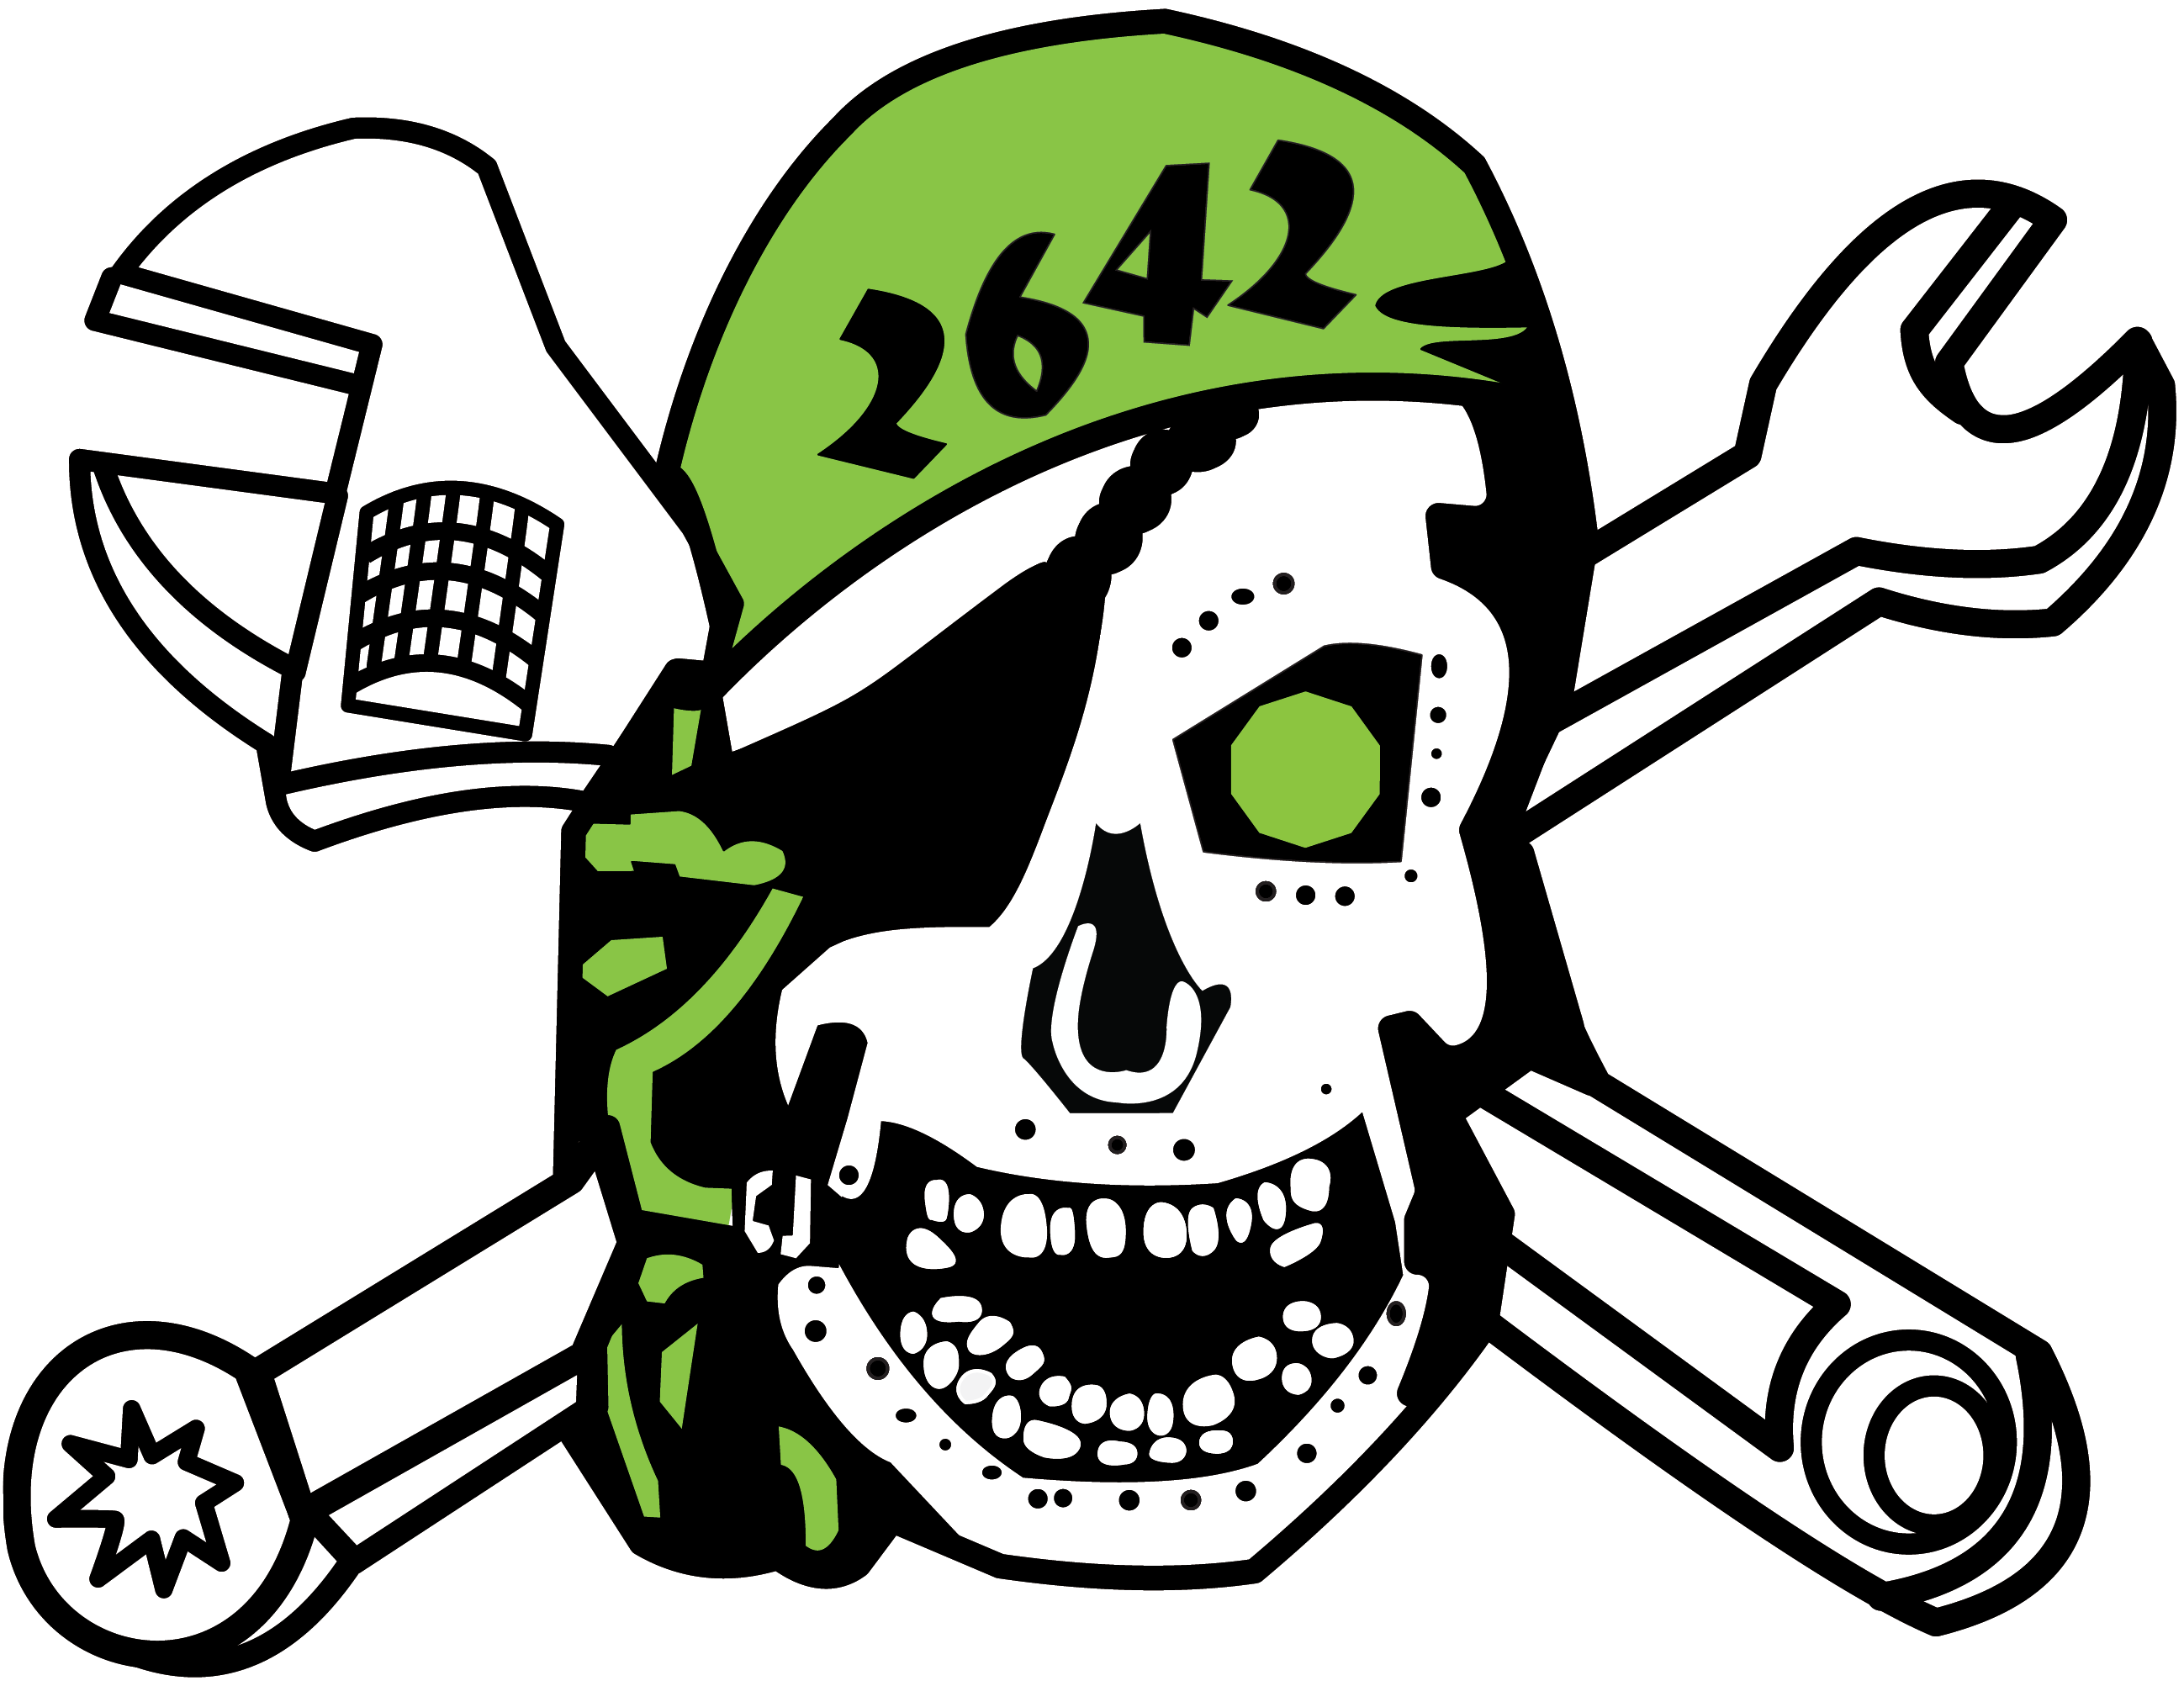 2642 skull and wrenches logo